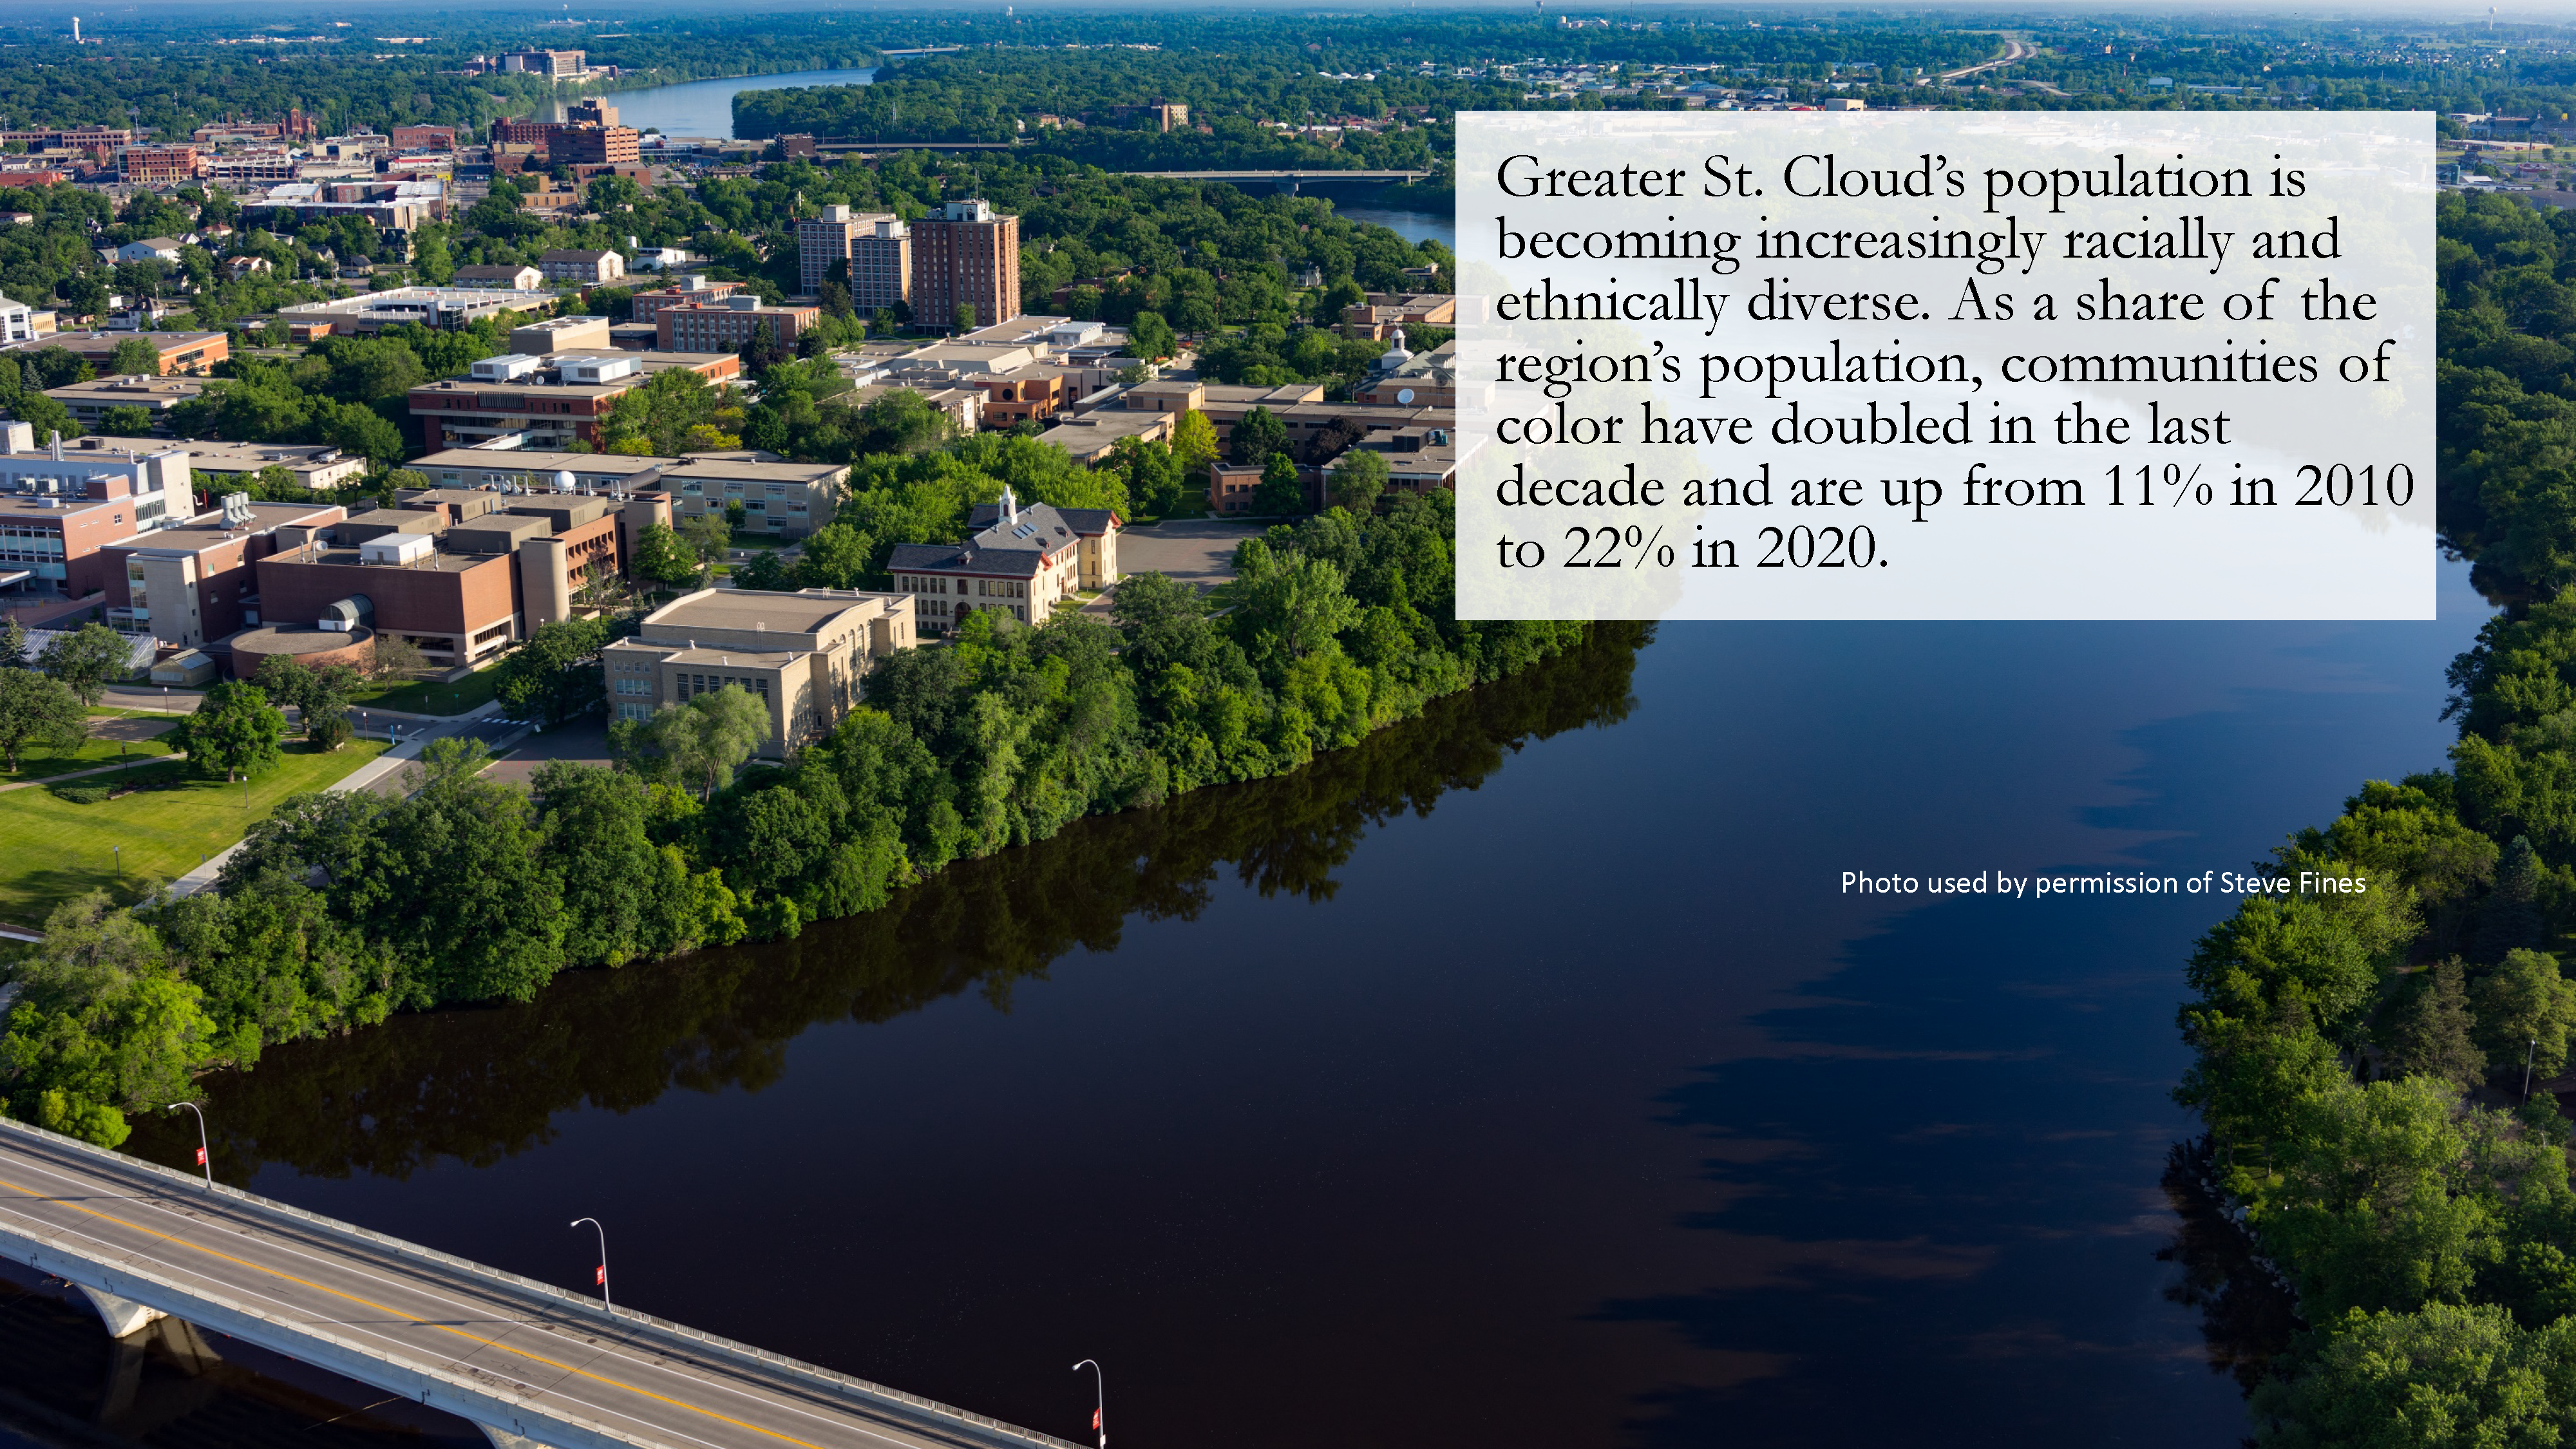 A picture of St. Cloud, MN featuring a quote from the Social Equity Dashboard: Greater St. Cloud's population is becoming increasingly racially and ethnically diverse. As a share of the region's population, communities of color have doubled in the last decade and are up from 11% in 2010 to 22% in 2020.